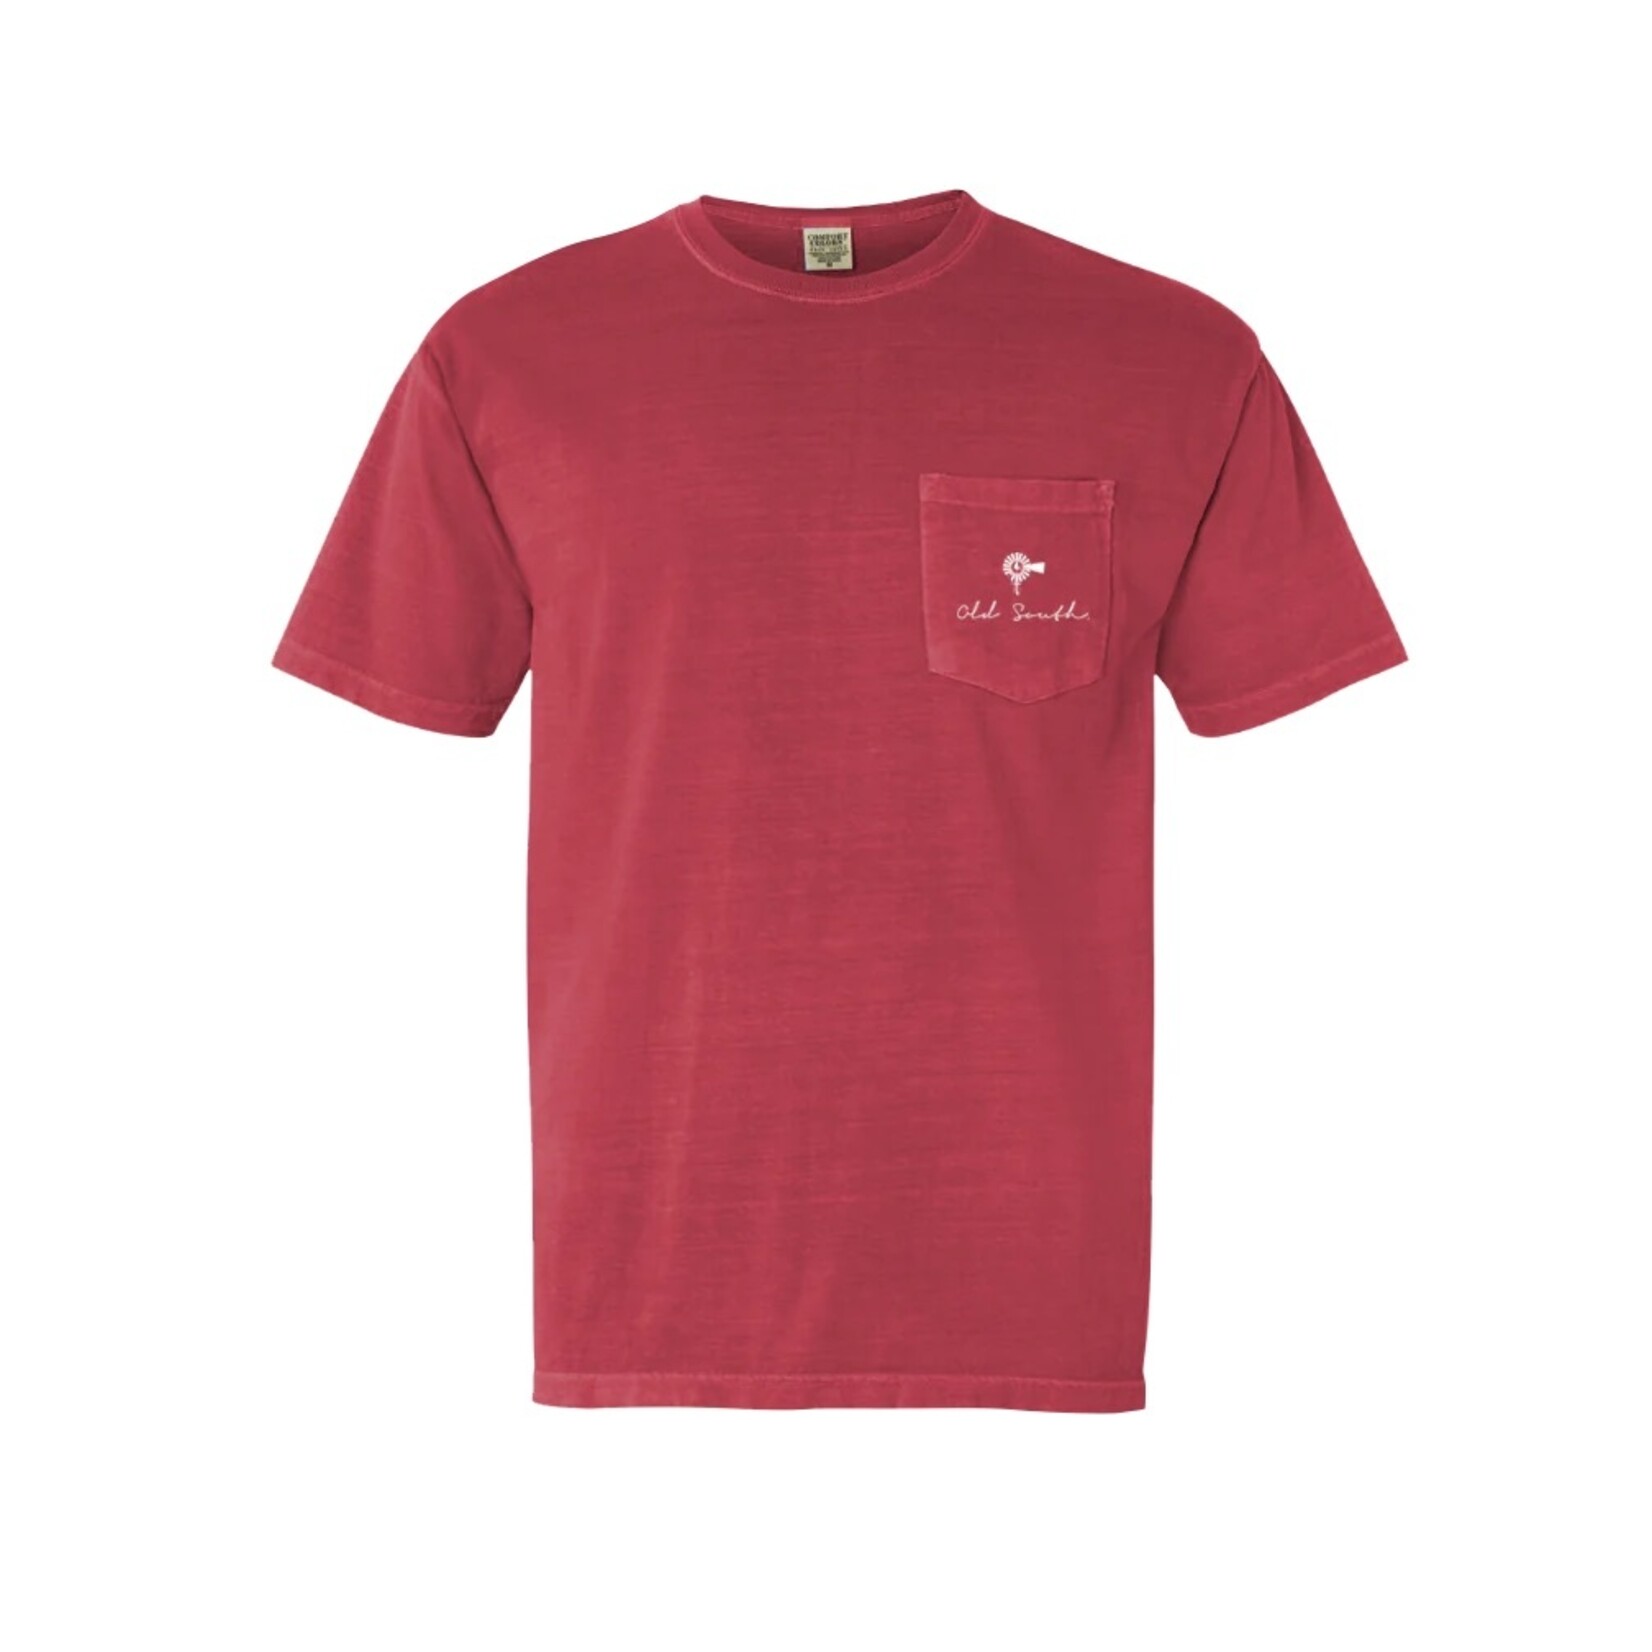 Old South Apparel Old South Apparel Branded S/S TEE Shirt